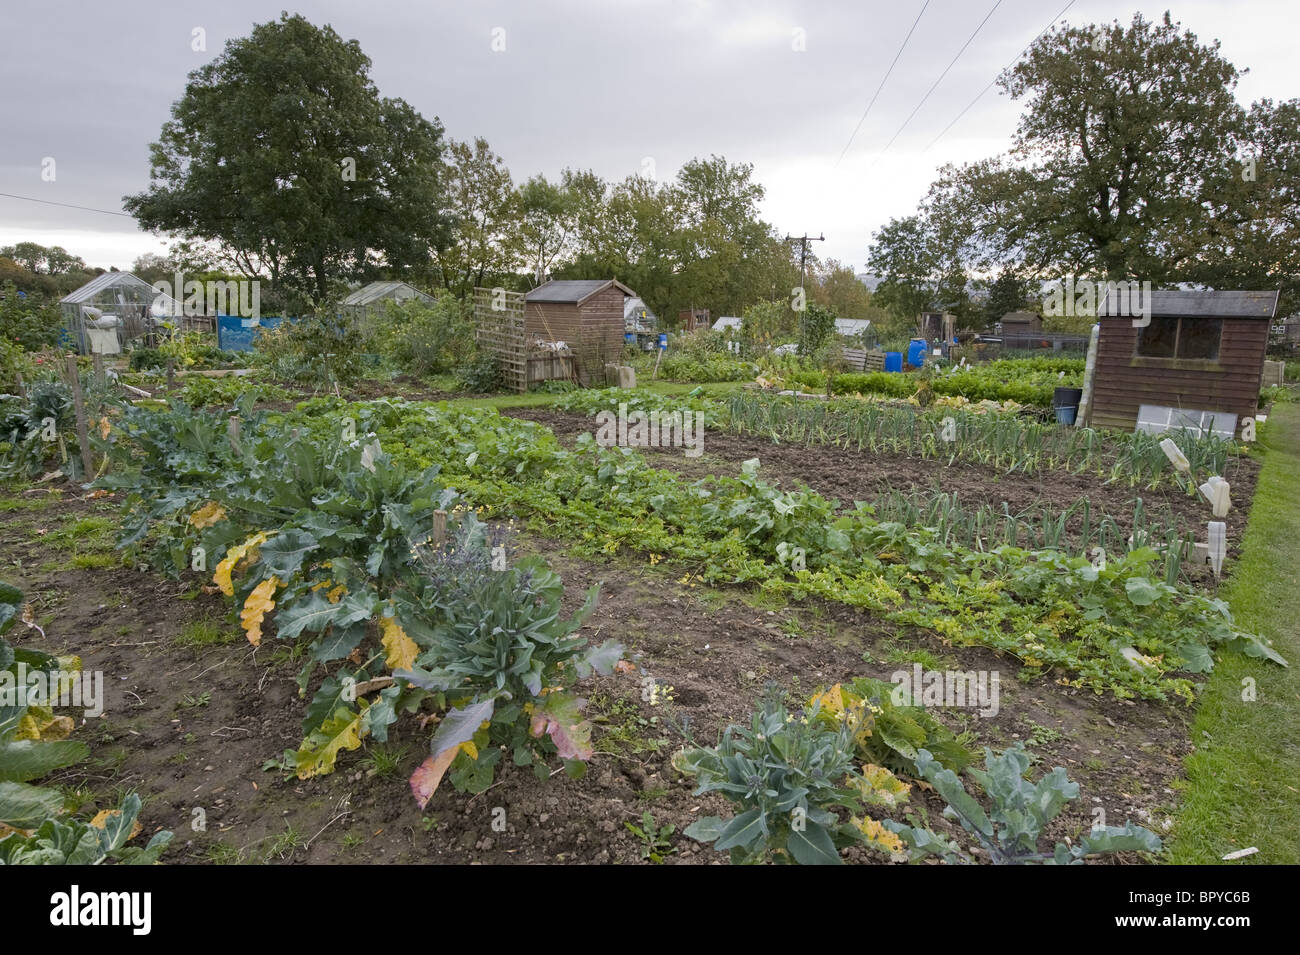 Produce growing on allotments. Stock Photo